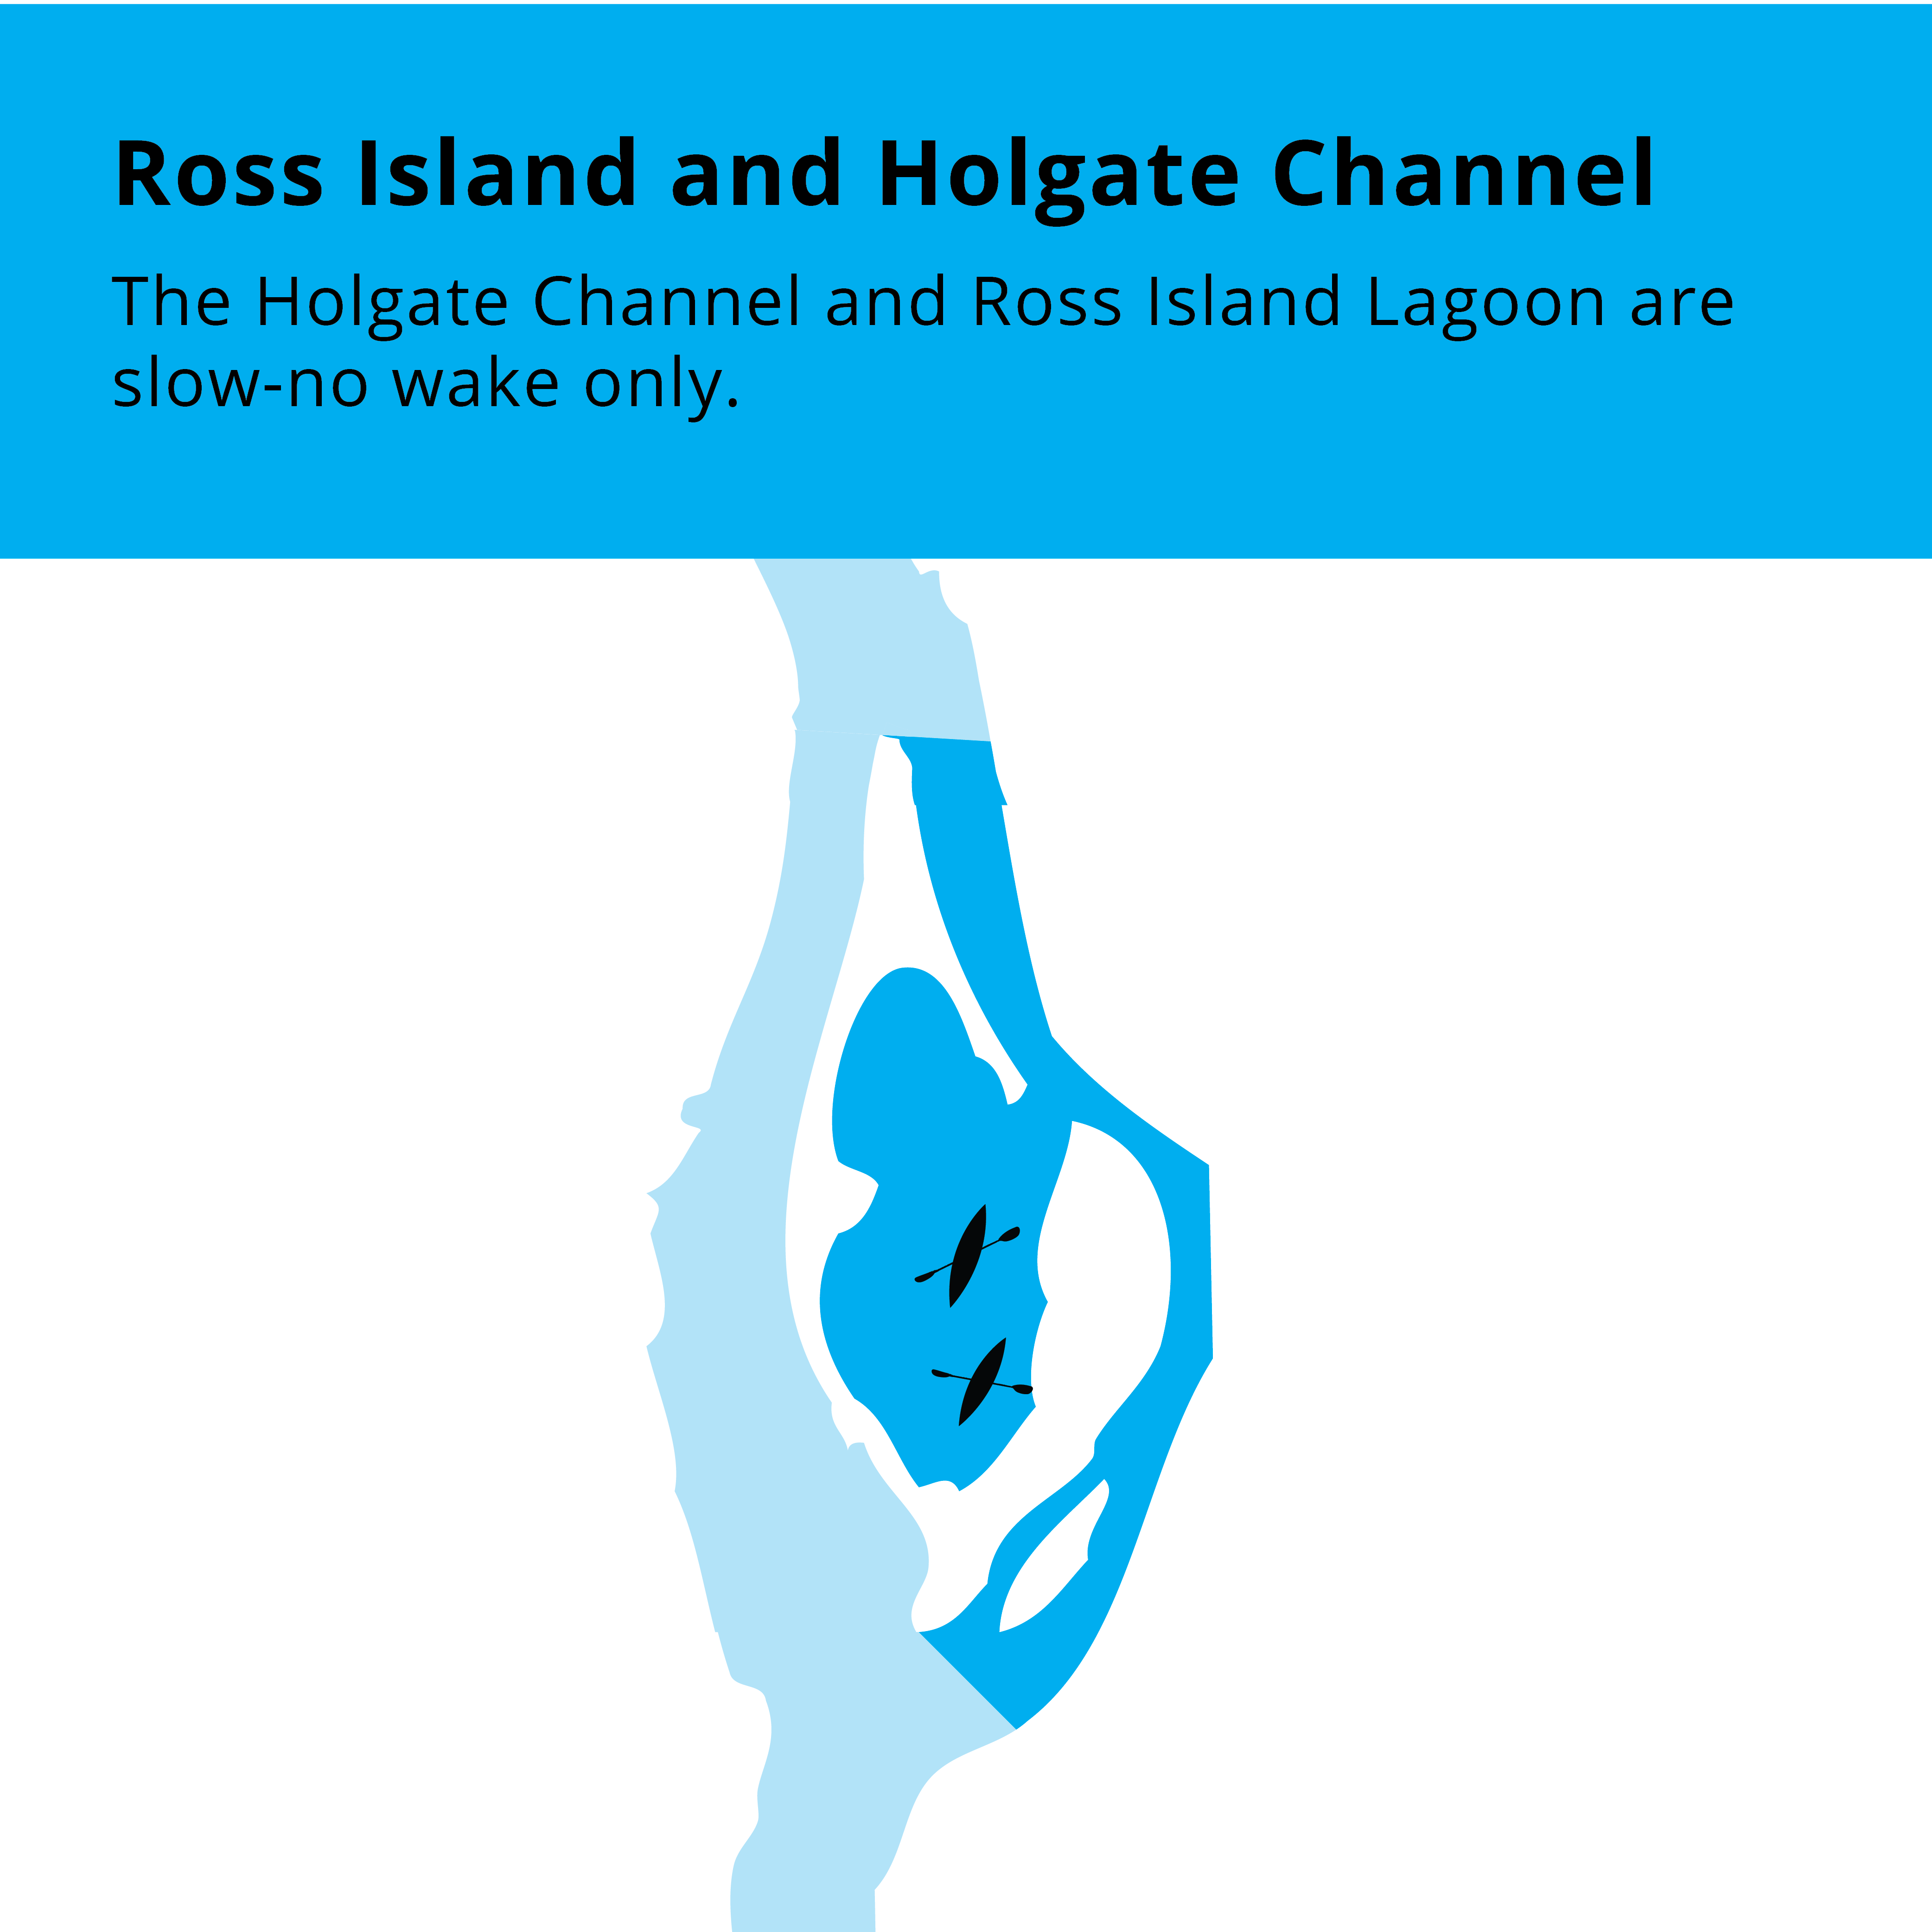 Regulations for Ross Island and the Holgate Channel